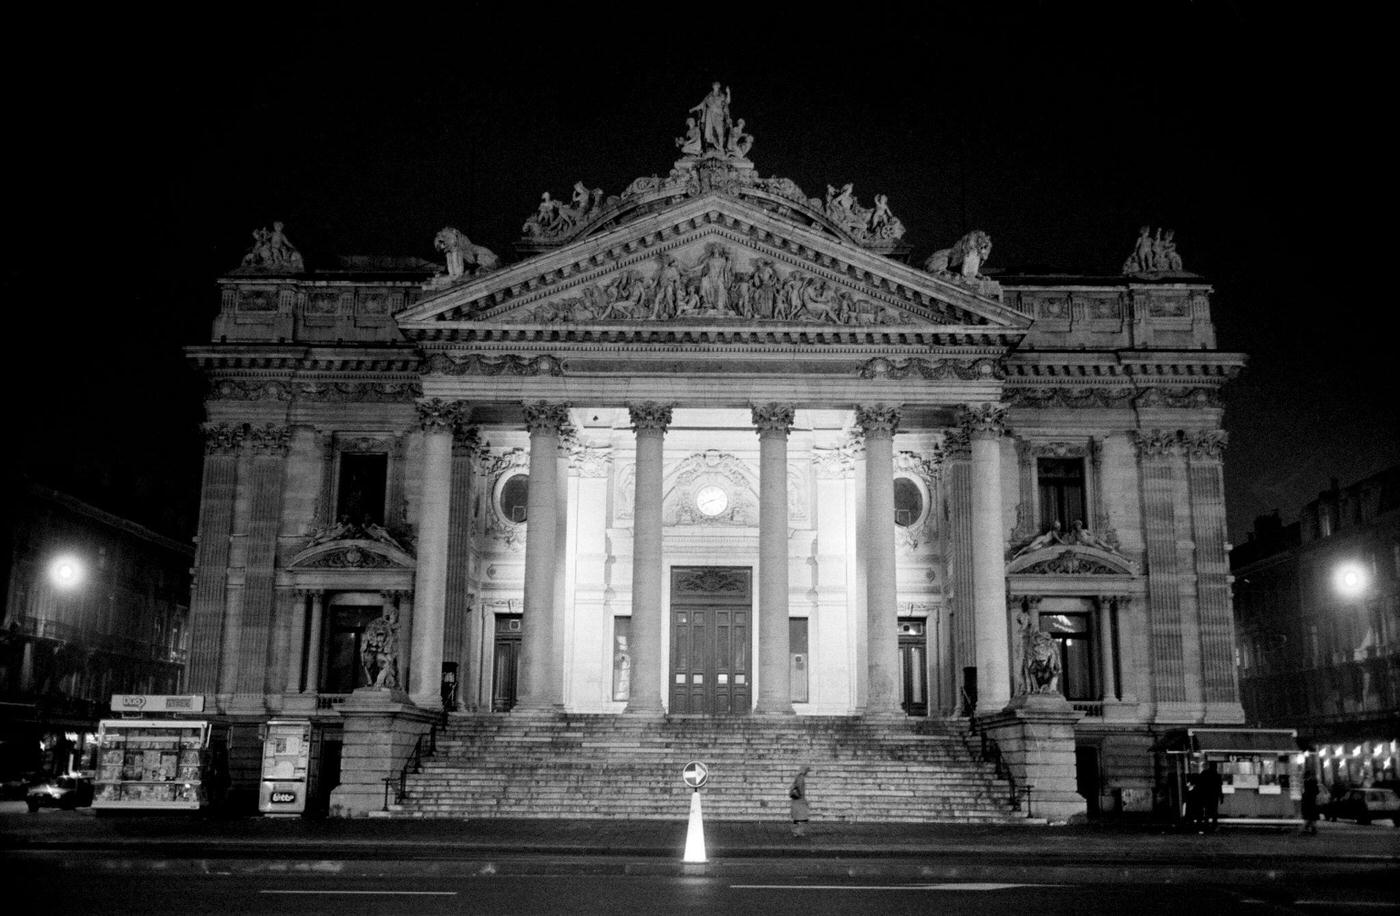 Night Atmosphere at the Brussels Stock Exchange, 1987